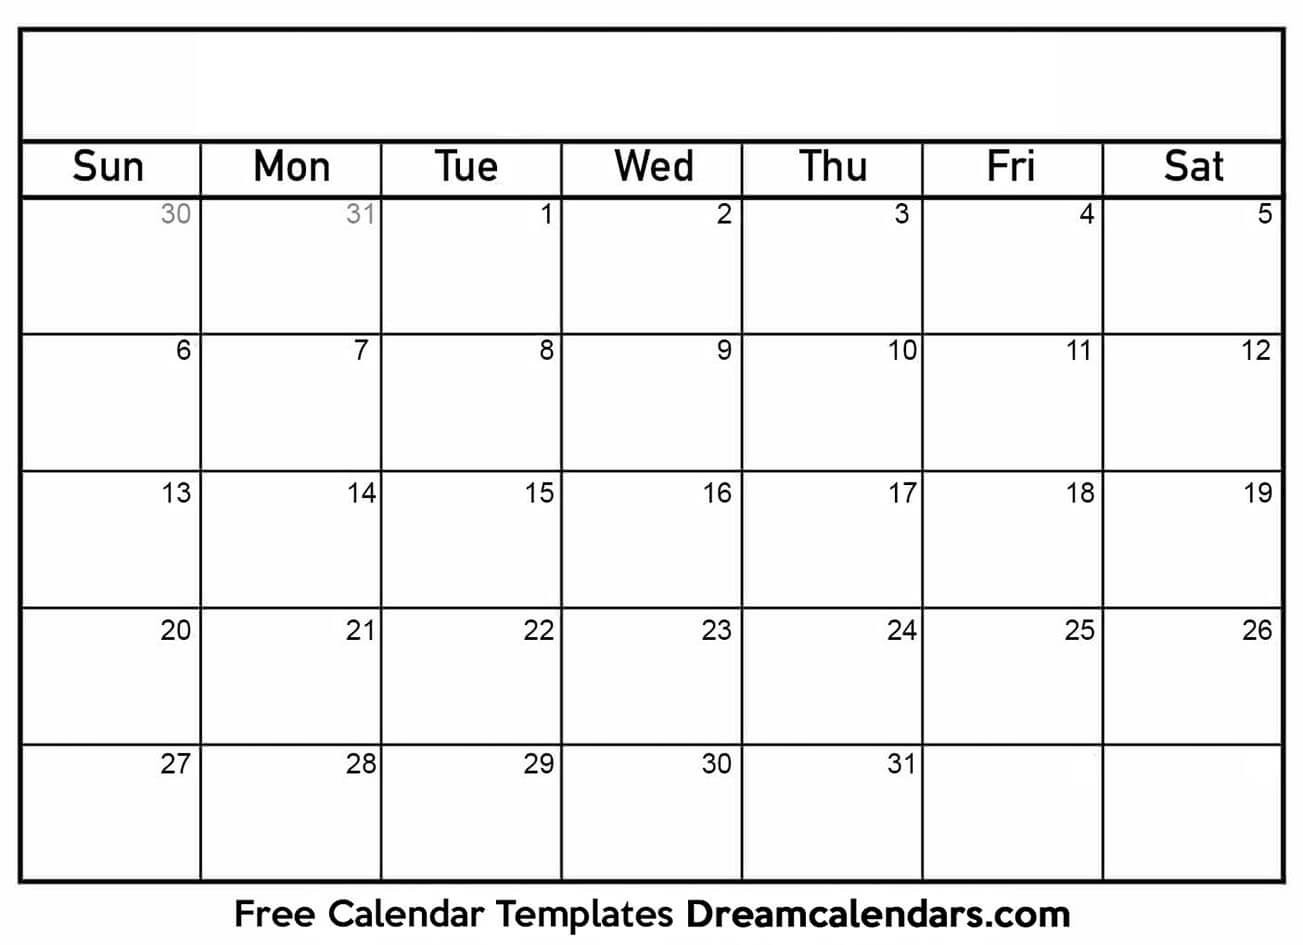 Free Blank Calendar Template Free Printable Calendar that You Can Type In